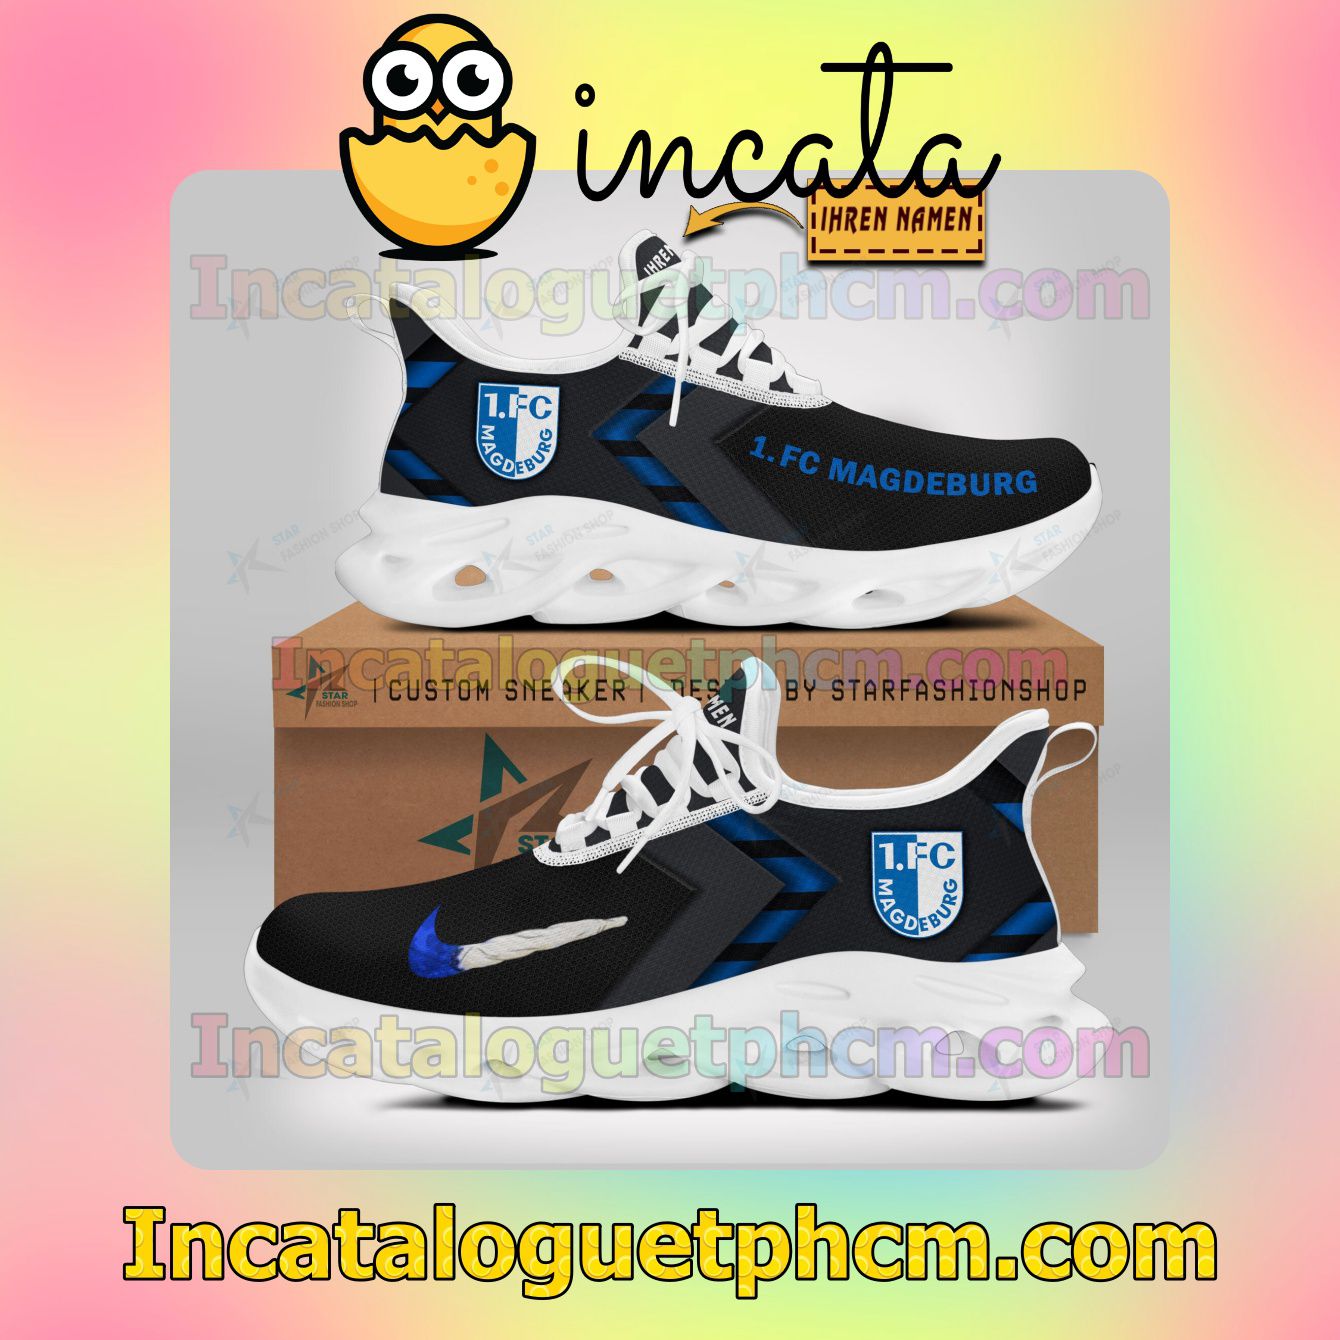 Wonderful 1. FC Magdeburg Low Top Shoes